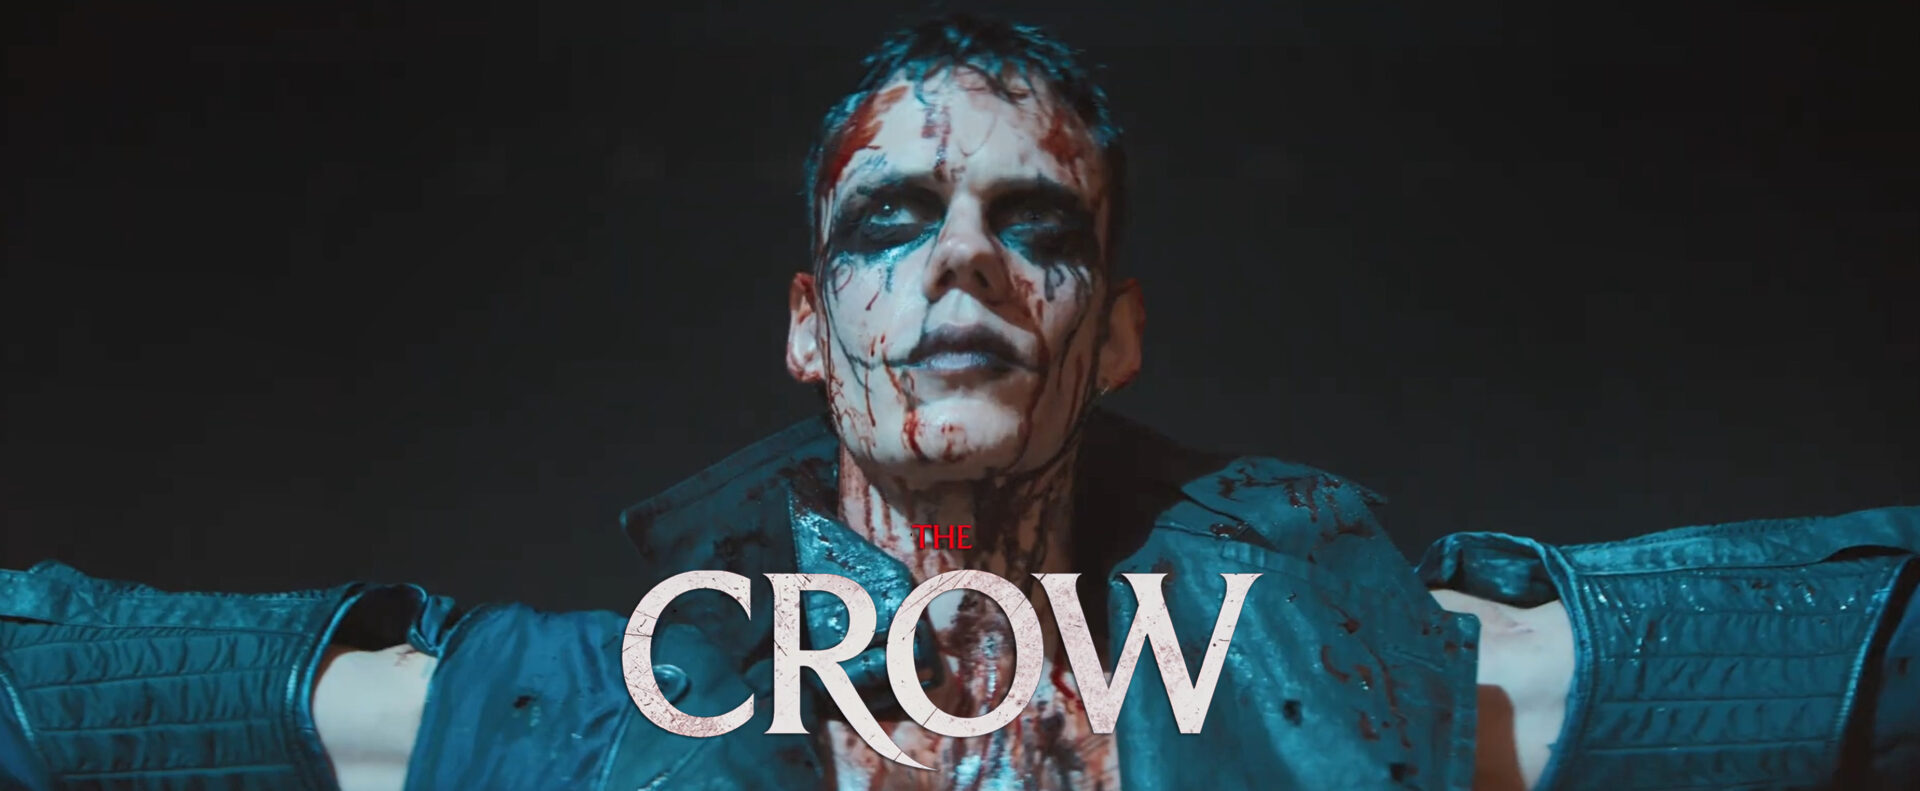 the crow theatrical trailer banner